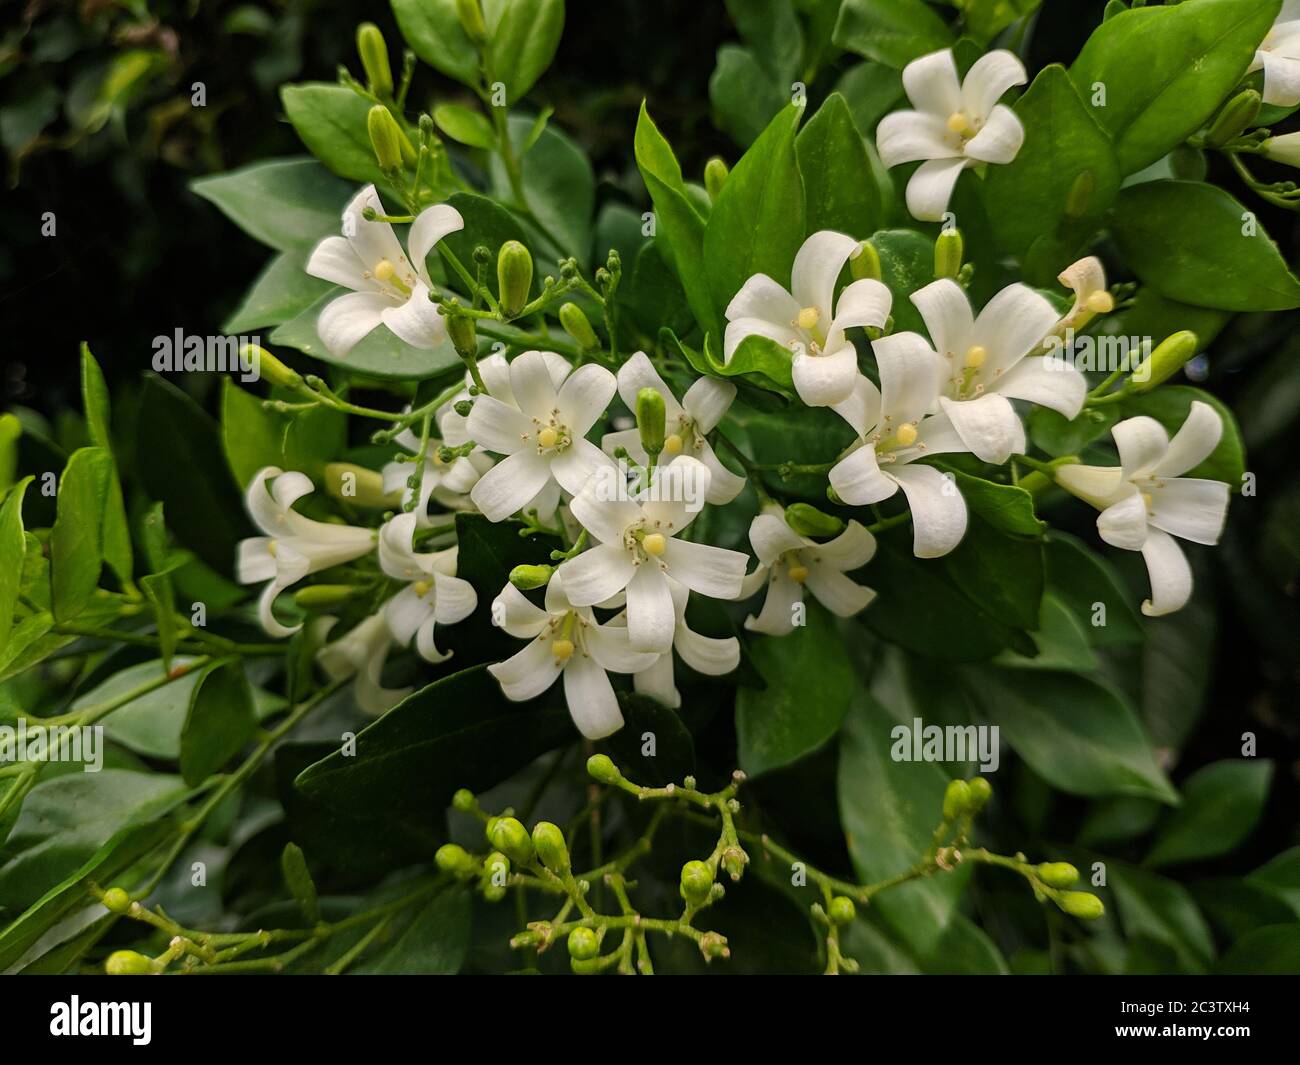 Unknown white flowers with yellow pistil in the garden Stock Photo - Alamy